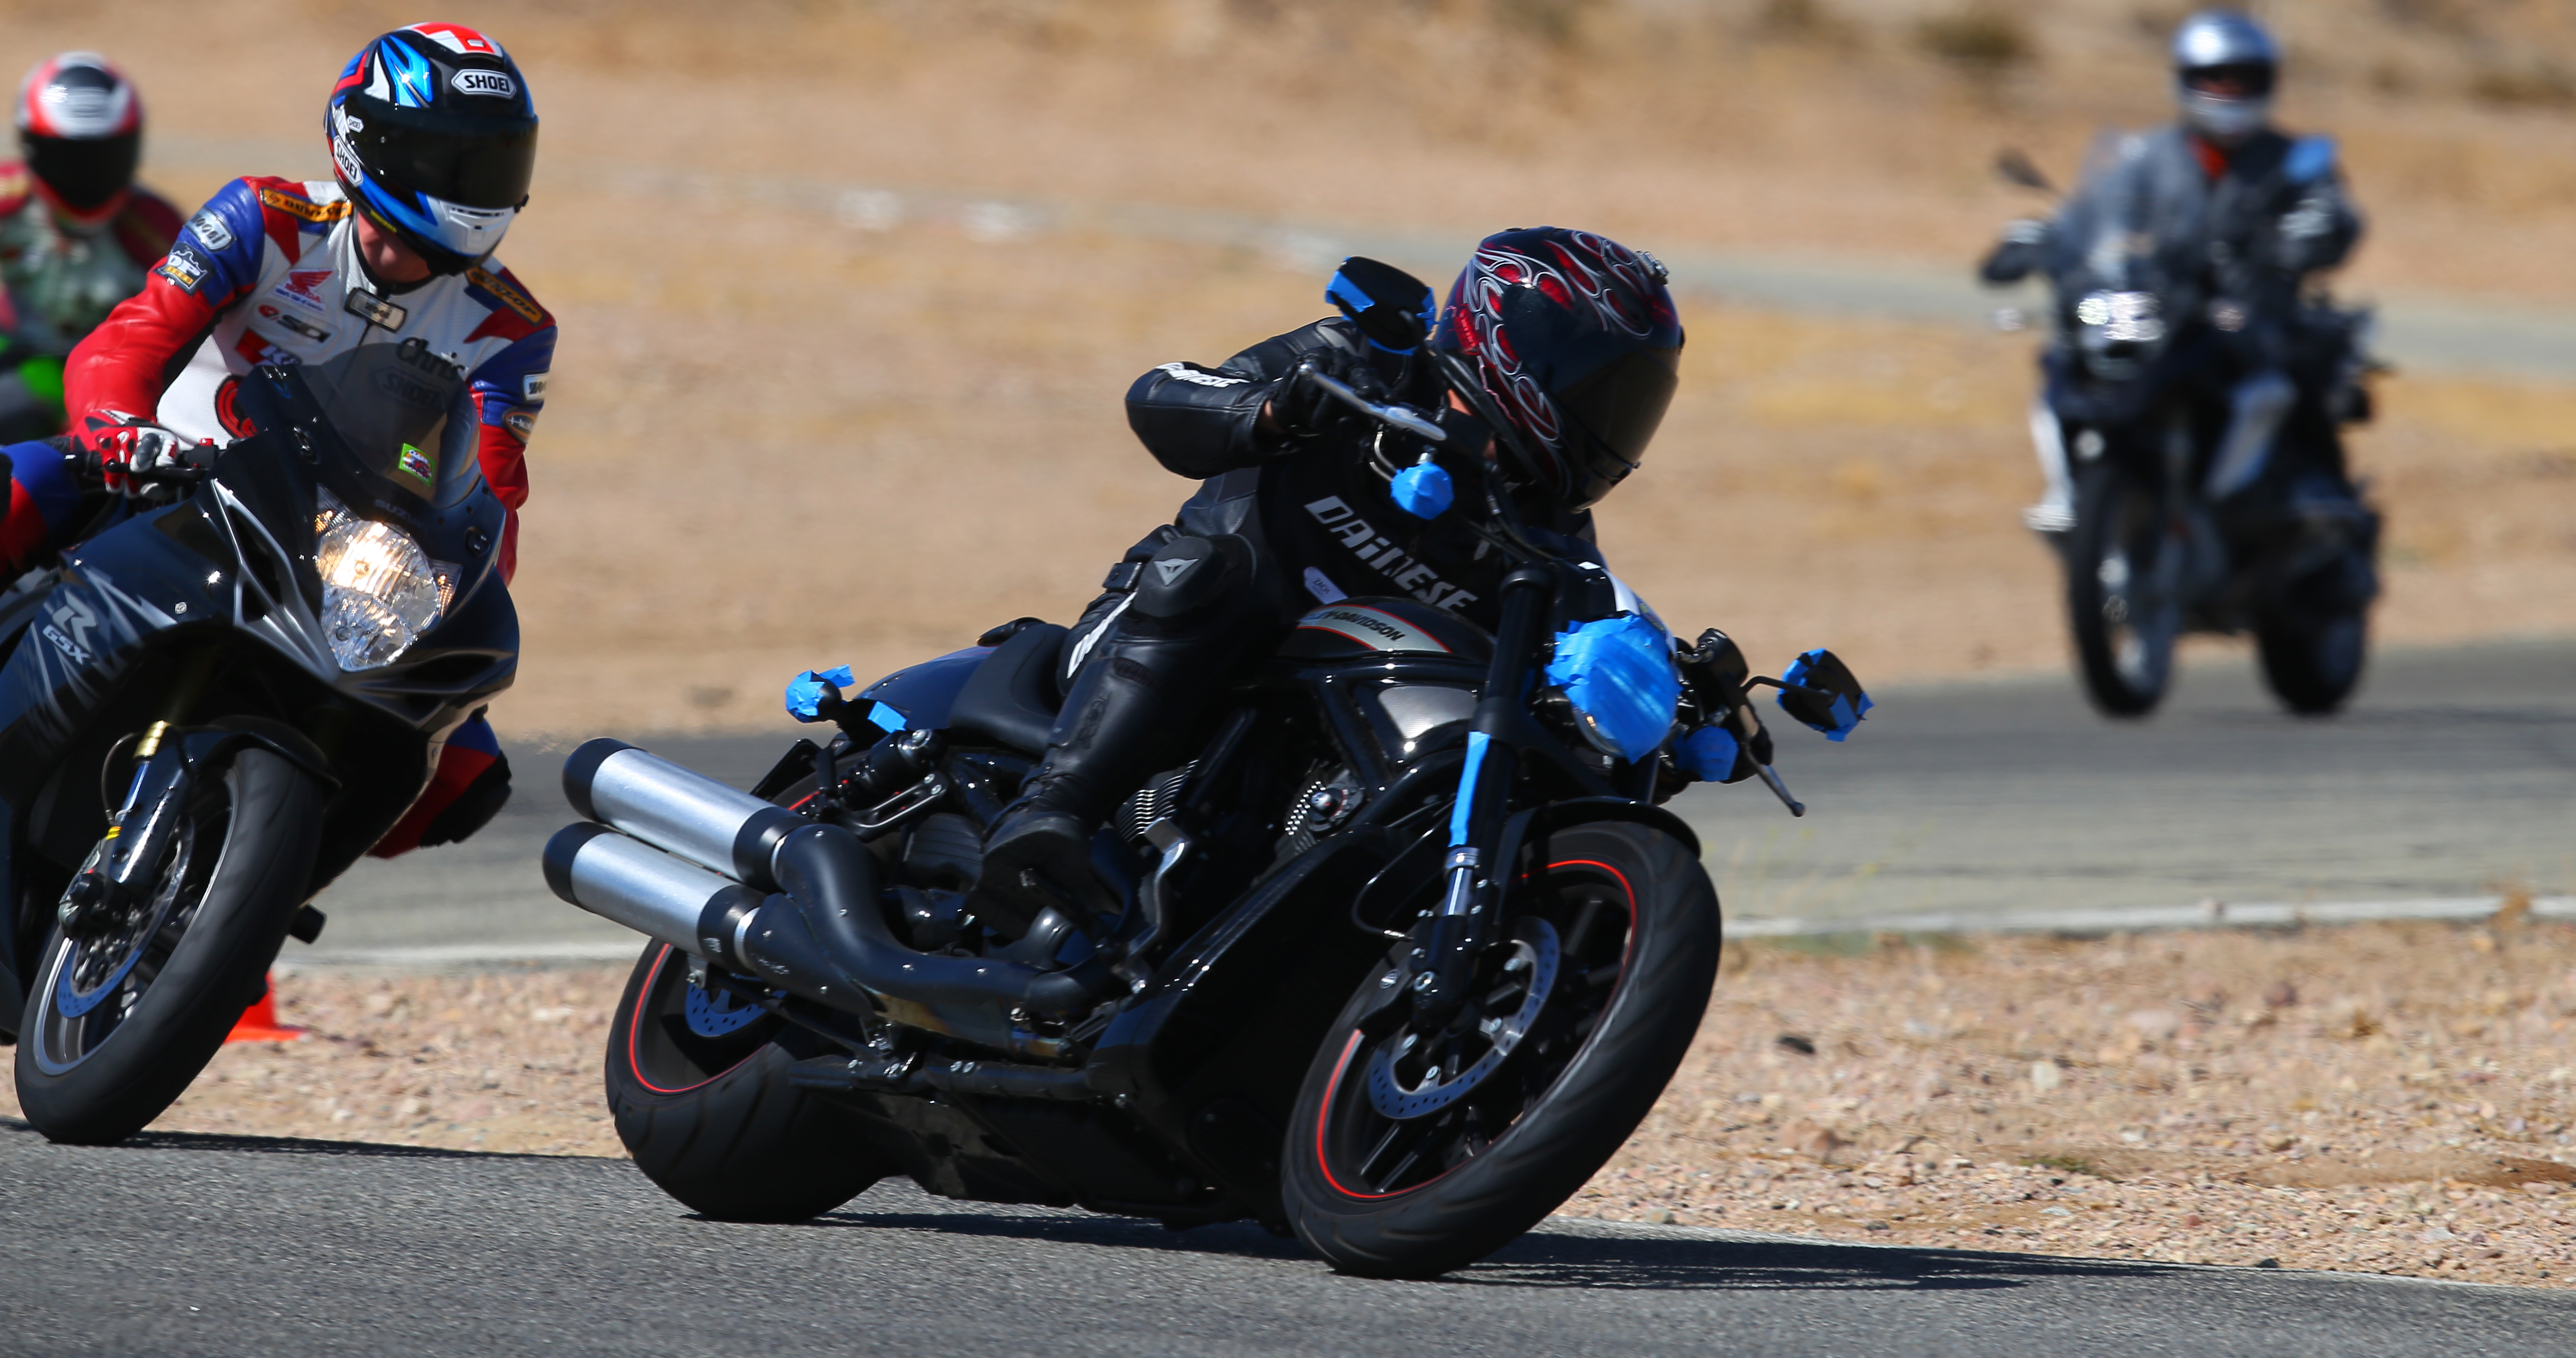 Outfitting your bike for your first trackday. Photo by etchphoto.